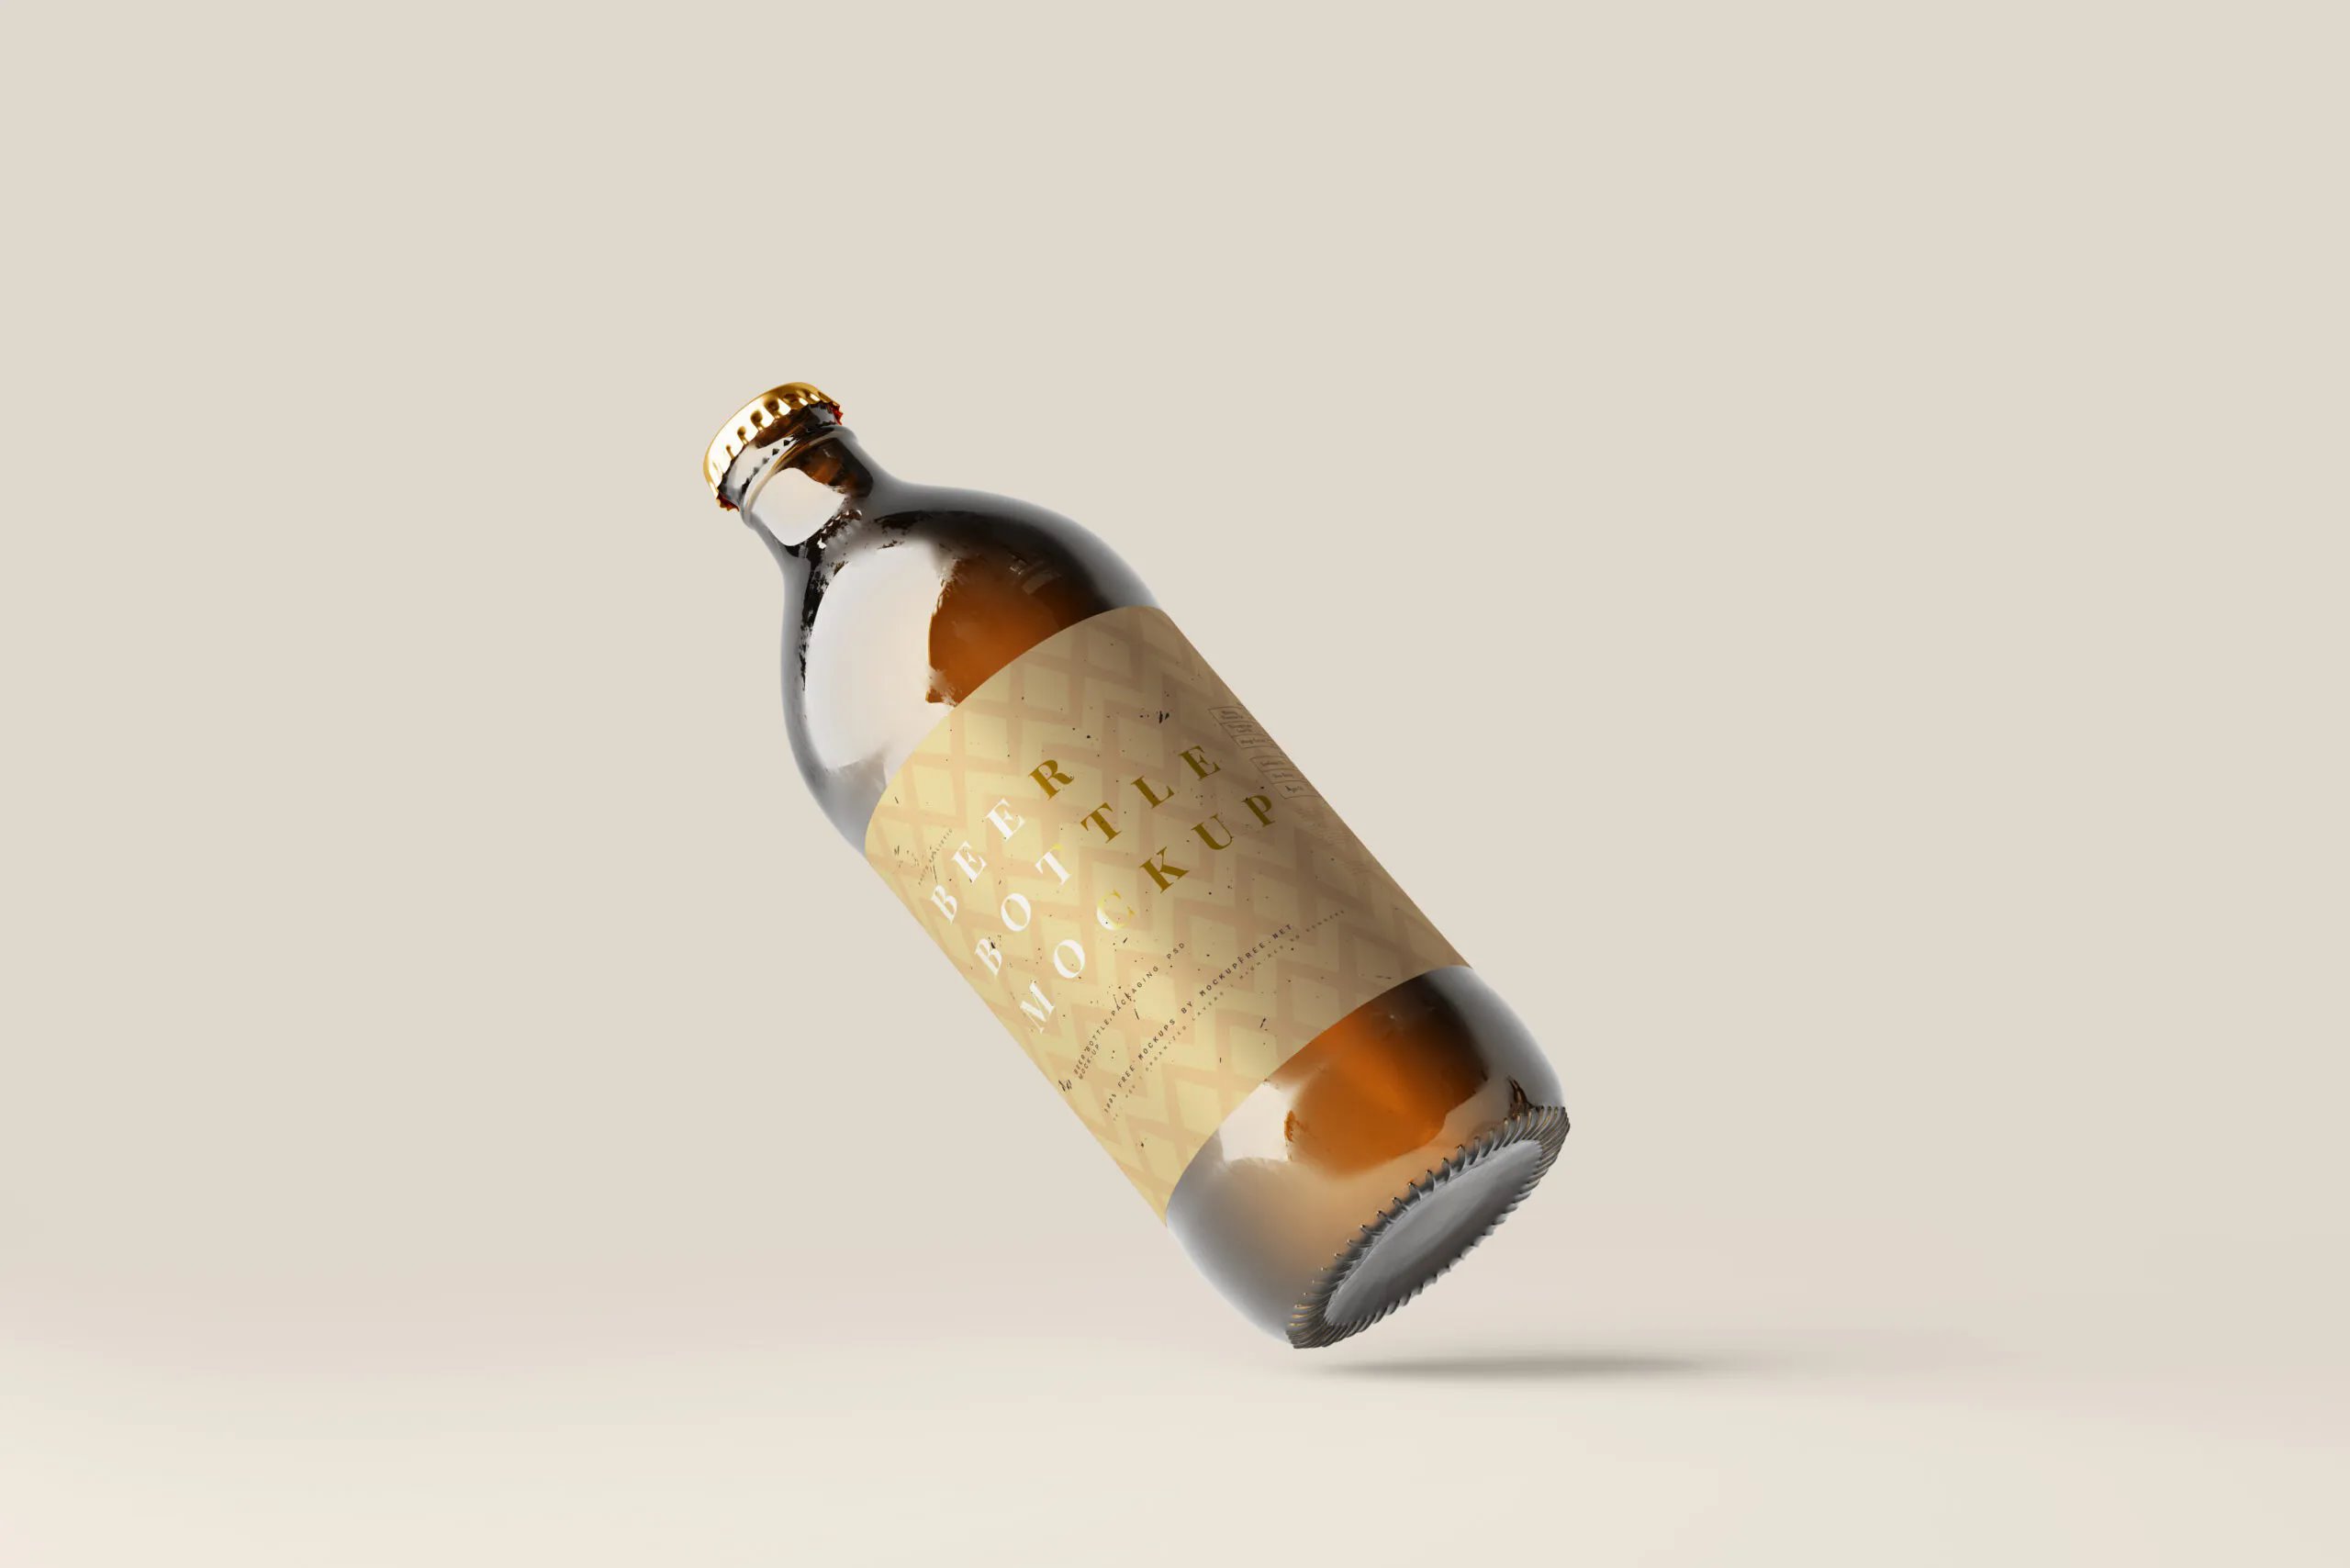 10 Large Beer Bottle Mockups in Different Visions FREE PSD